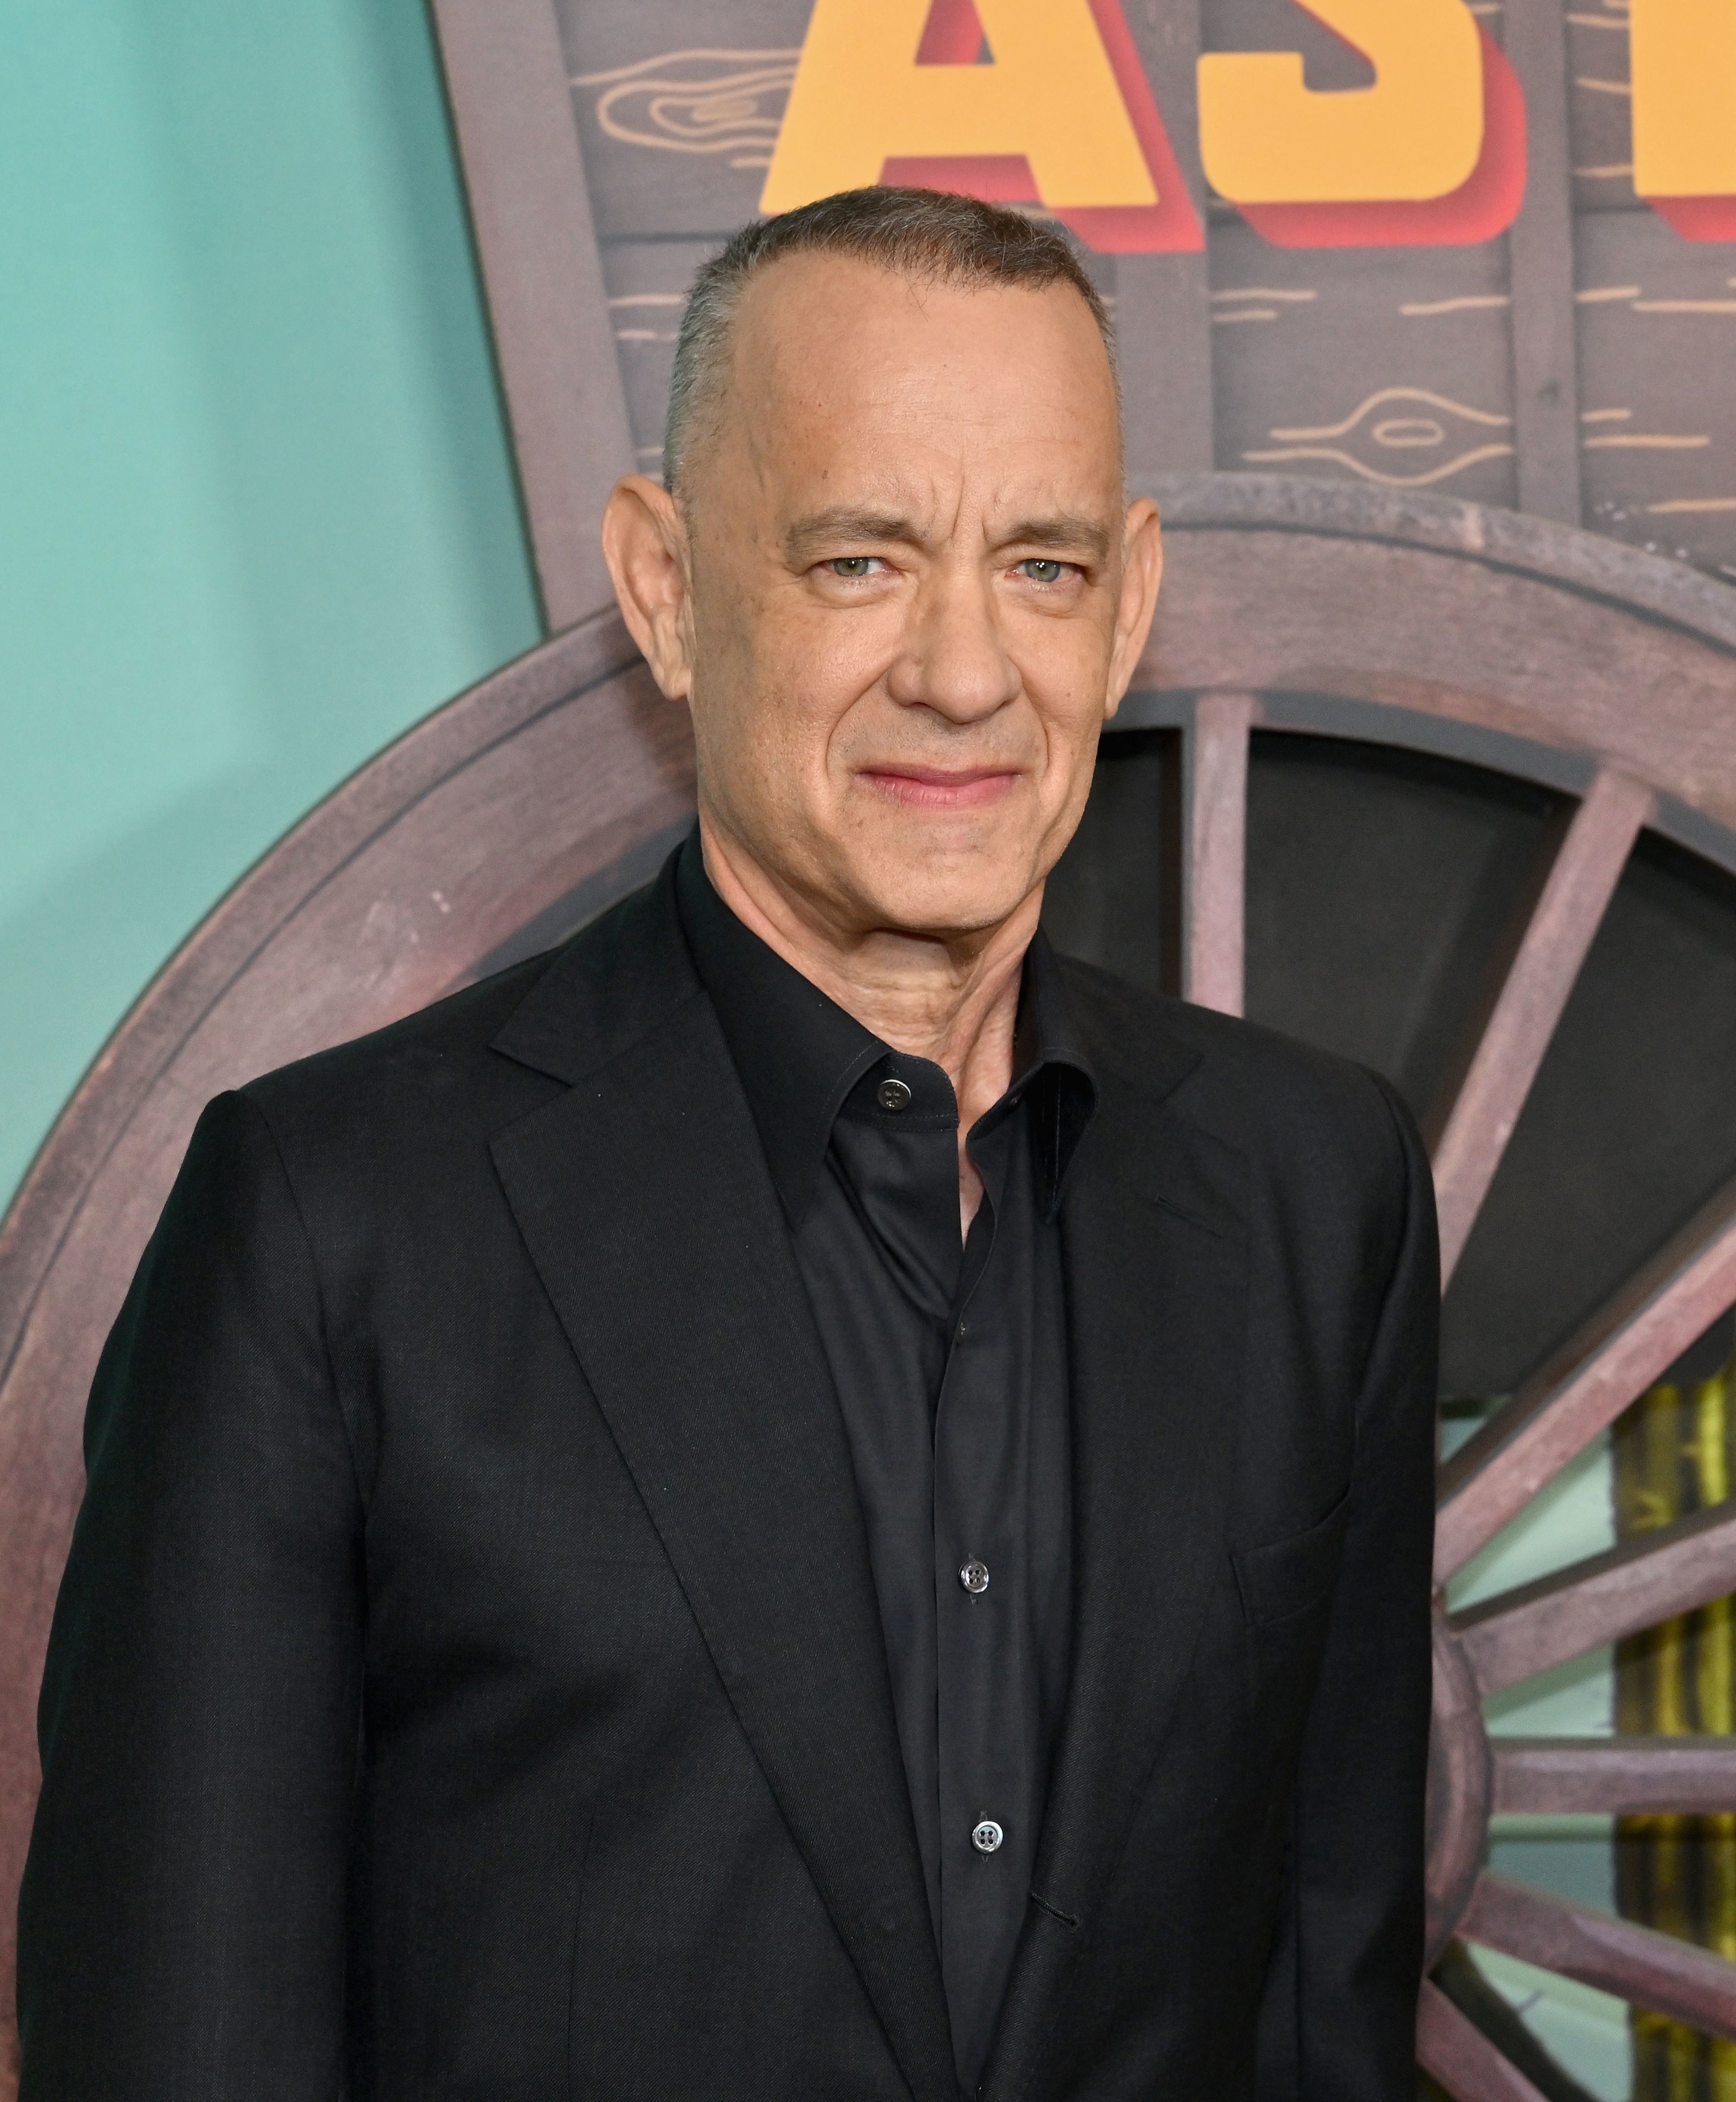 Tom Hanks wearing a classic black suit standing before a promotional backdrop